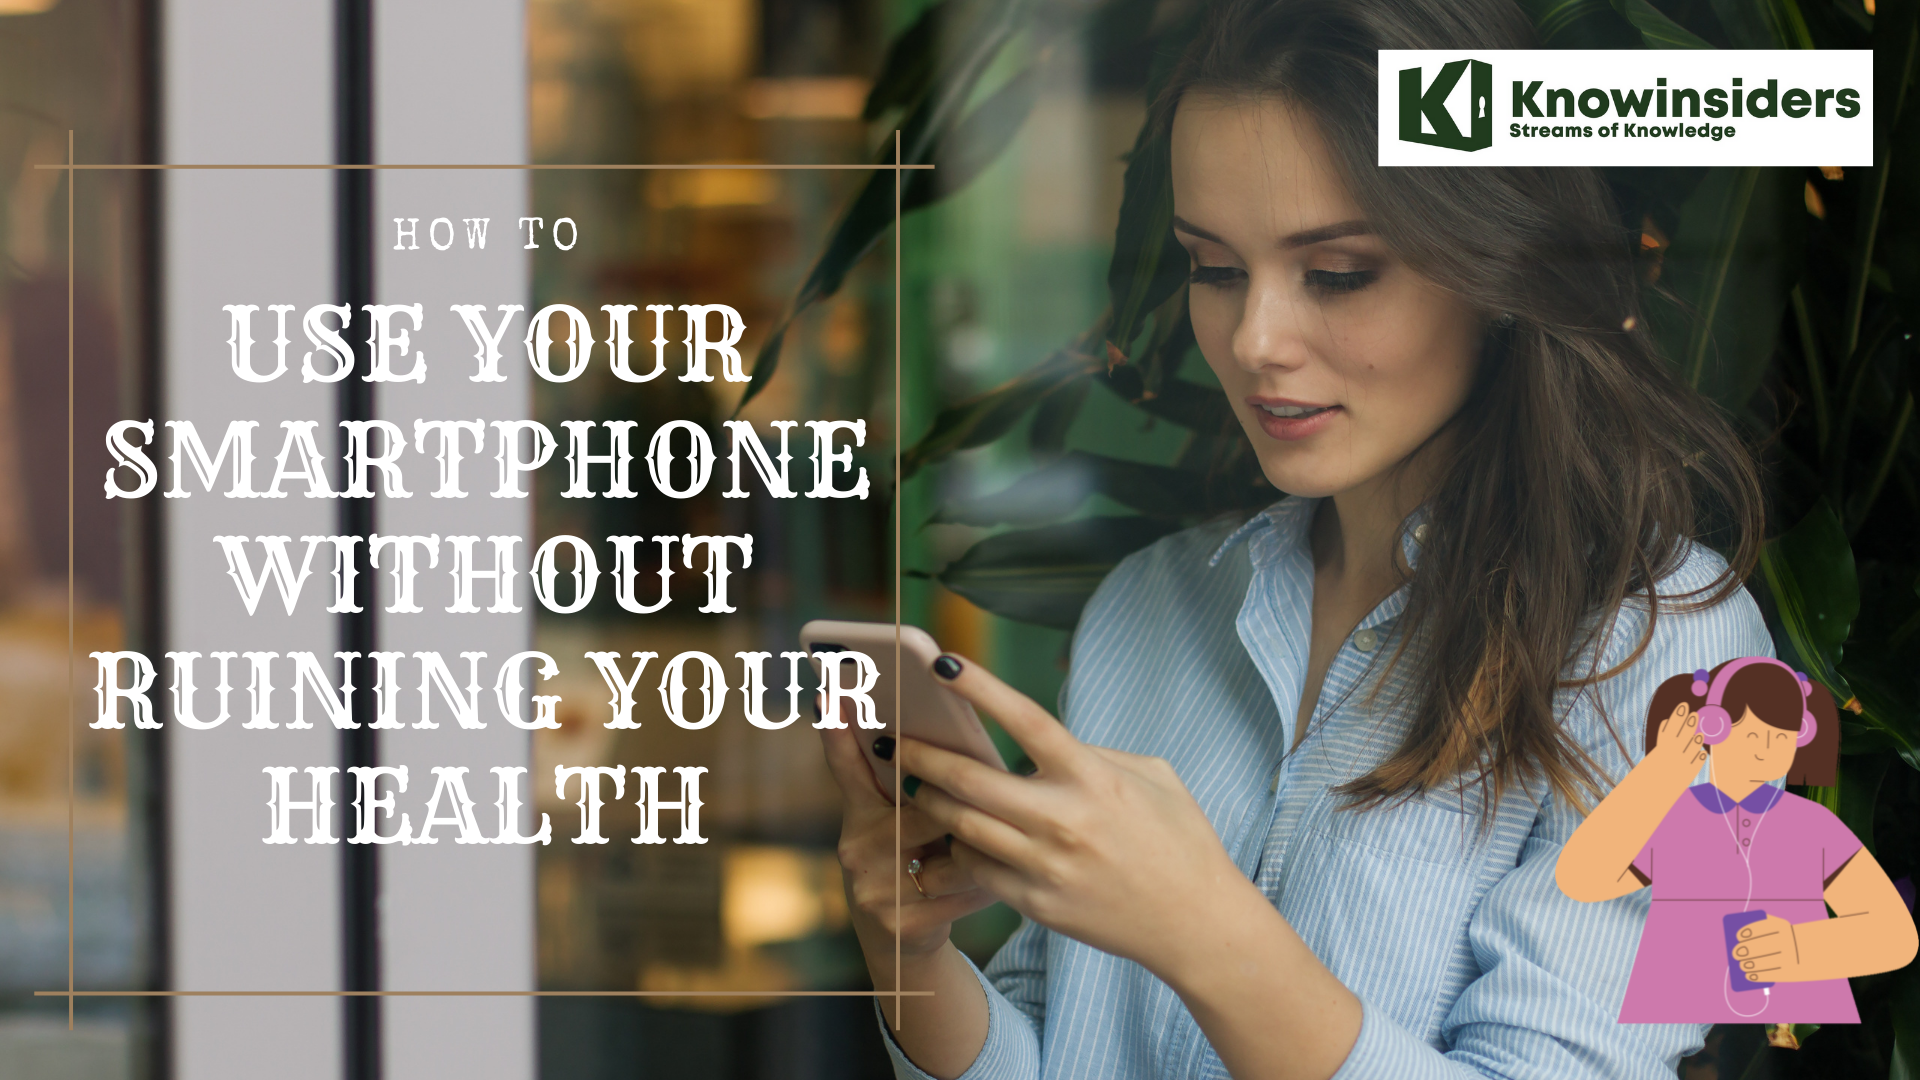 how to use your smartphone without ruining your health 8 simple tips